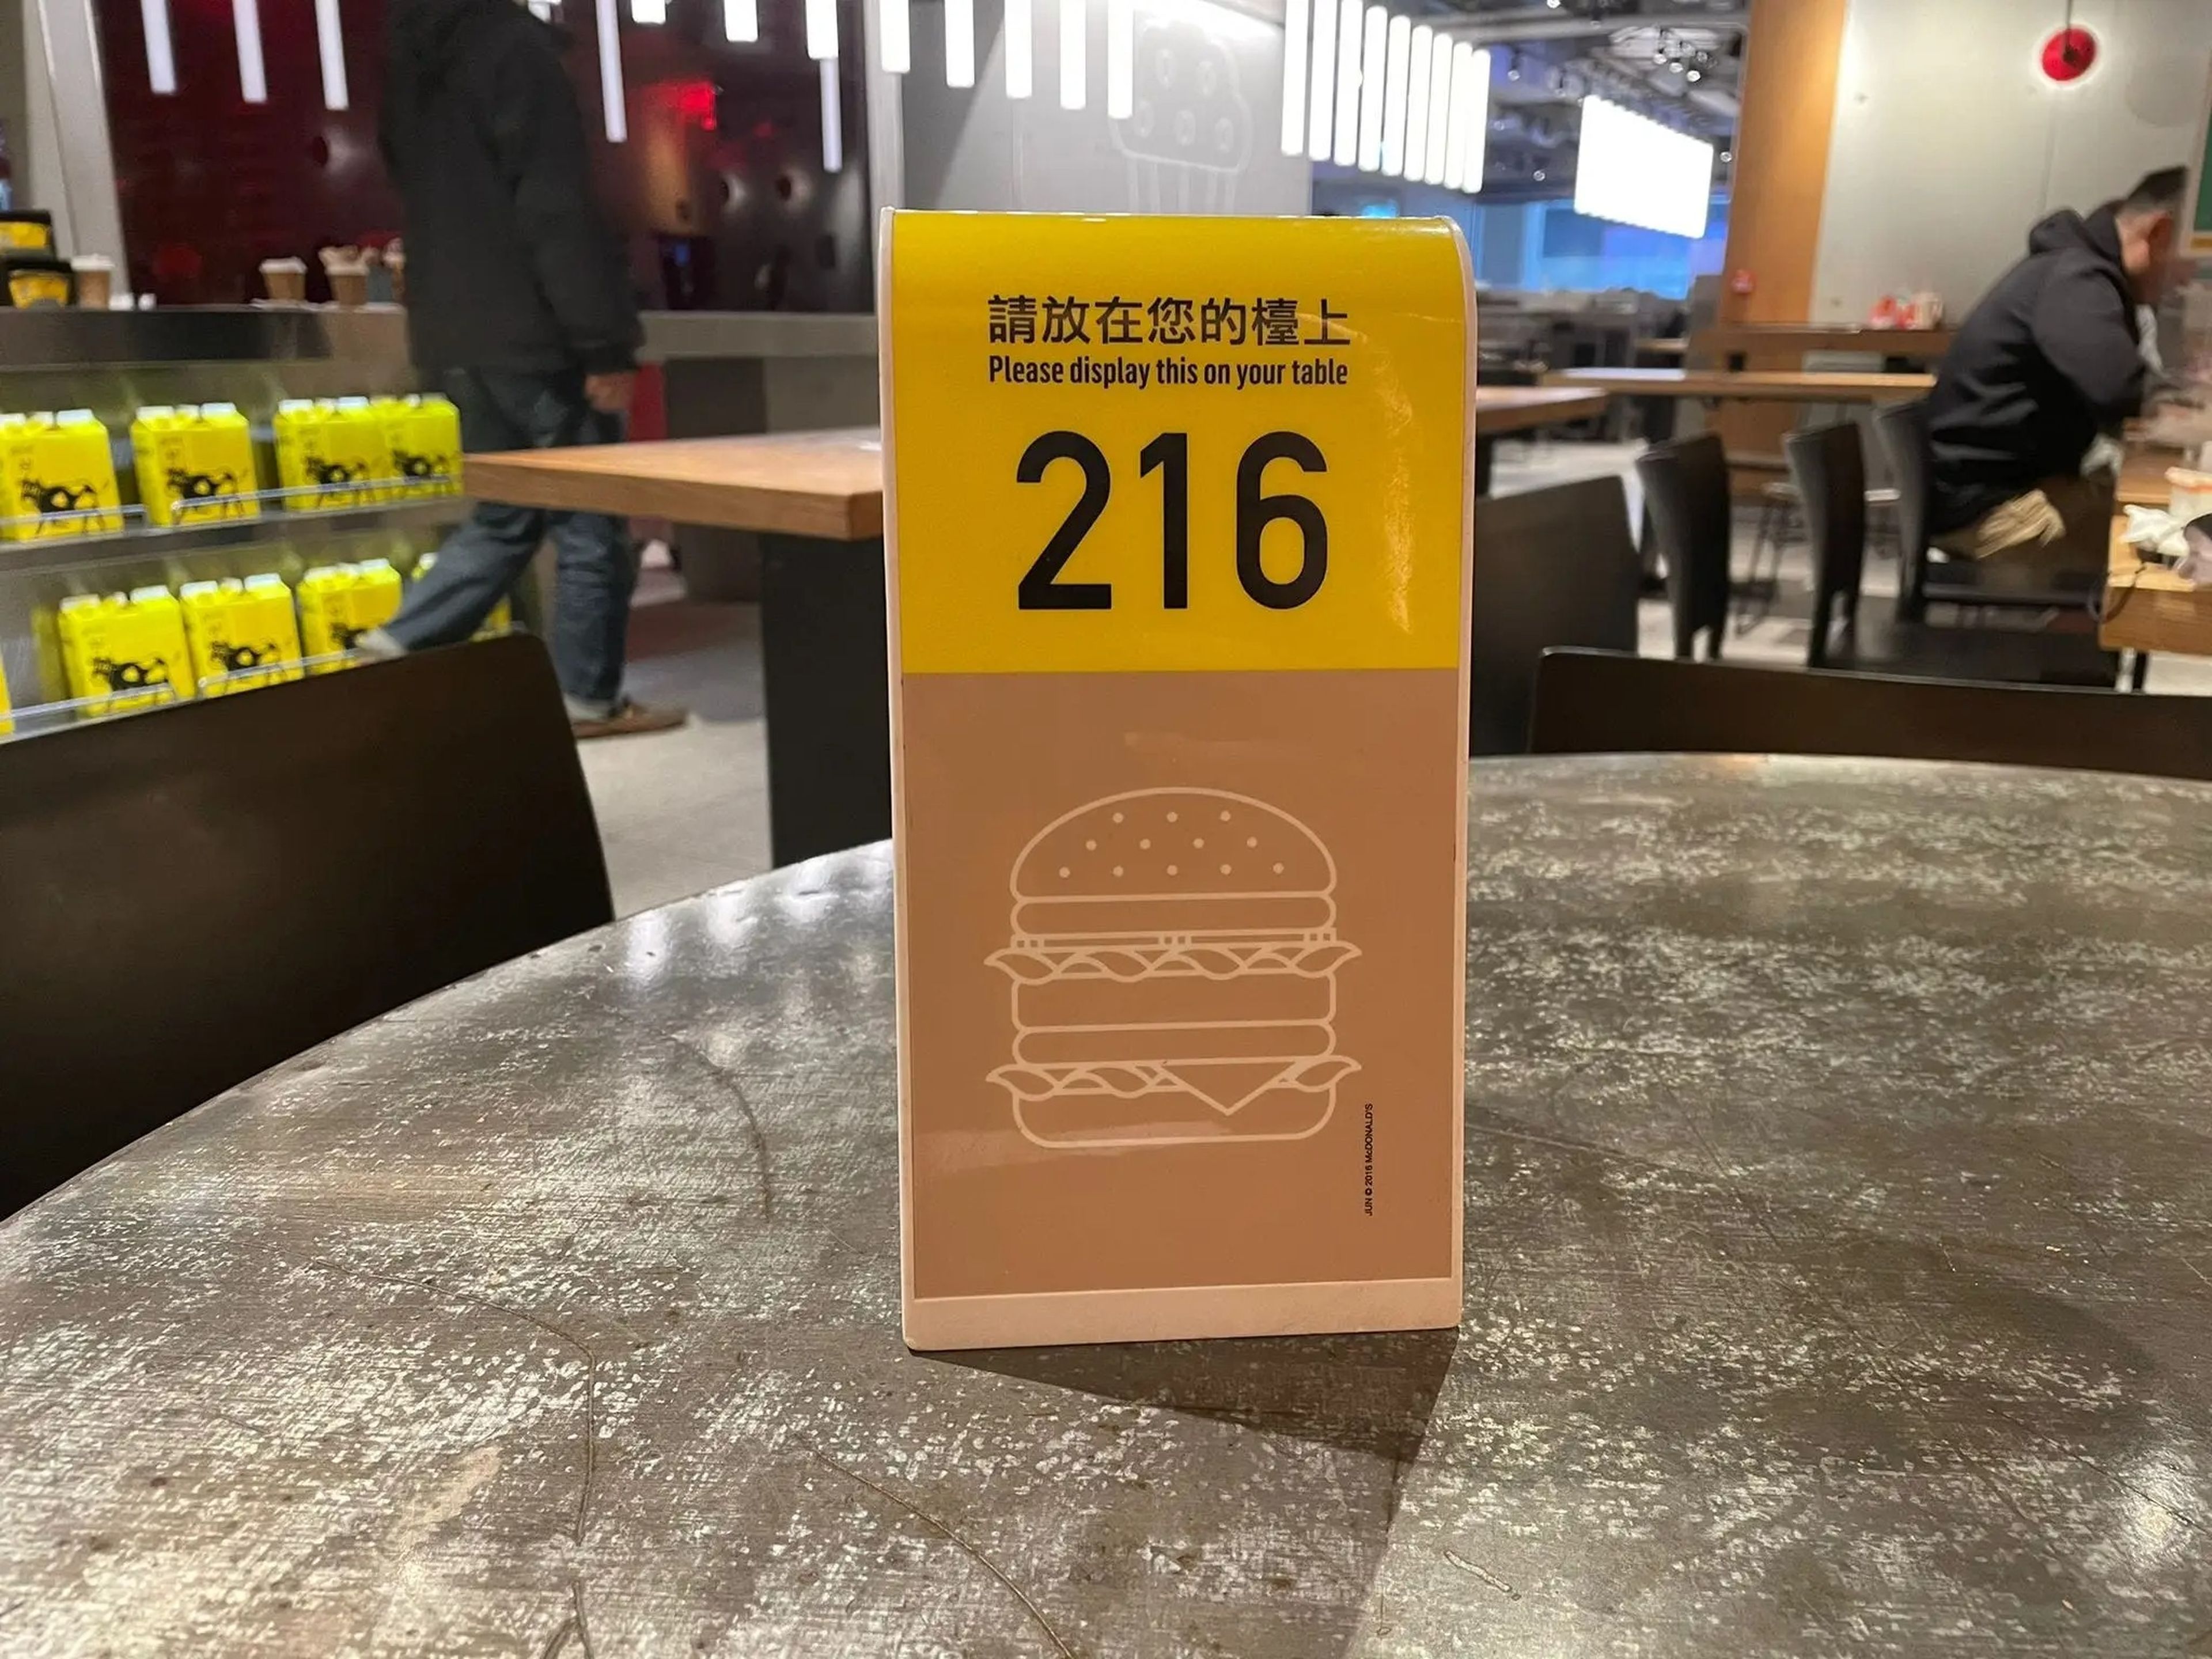 A plastic marker on a table with a brown illustration with a burger on it and the number "216" printed on it